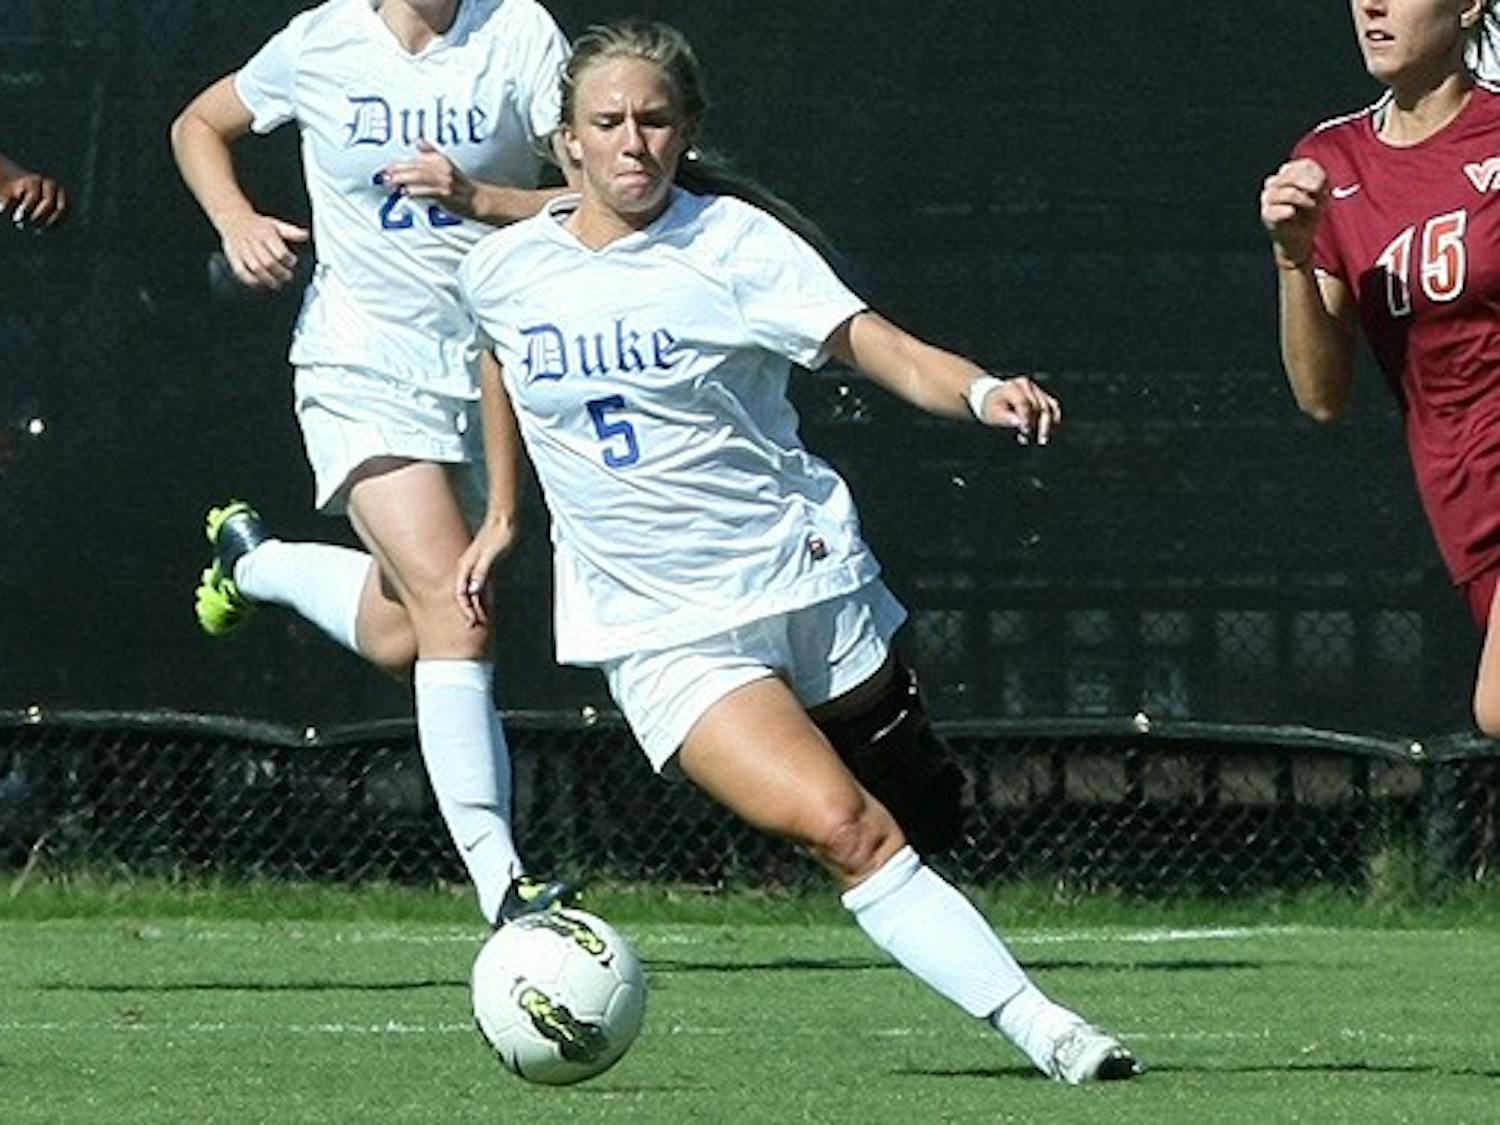 Kaitlyn Kerr scored Duke’s only goal in the 68th minute, leading the team to its first-ever win at Boston College.